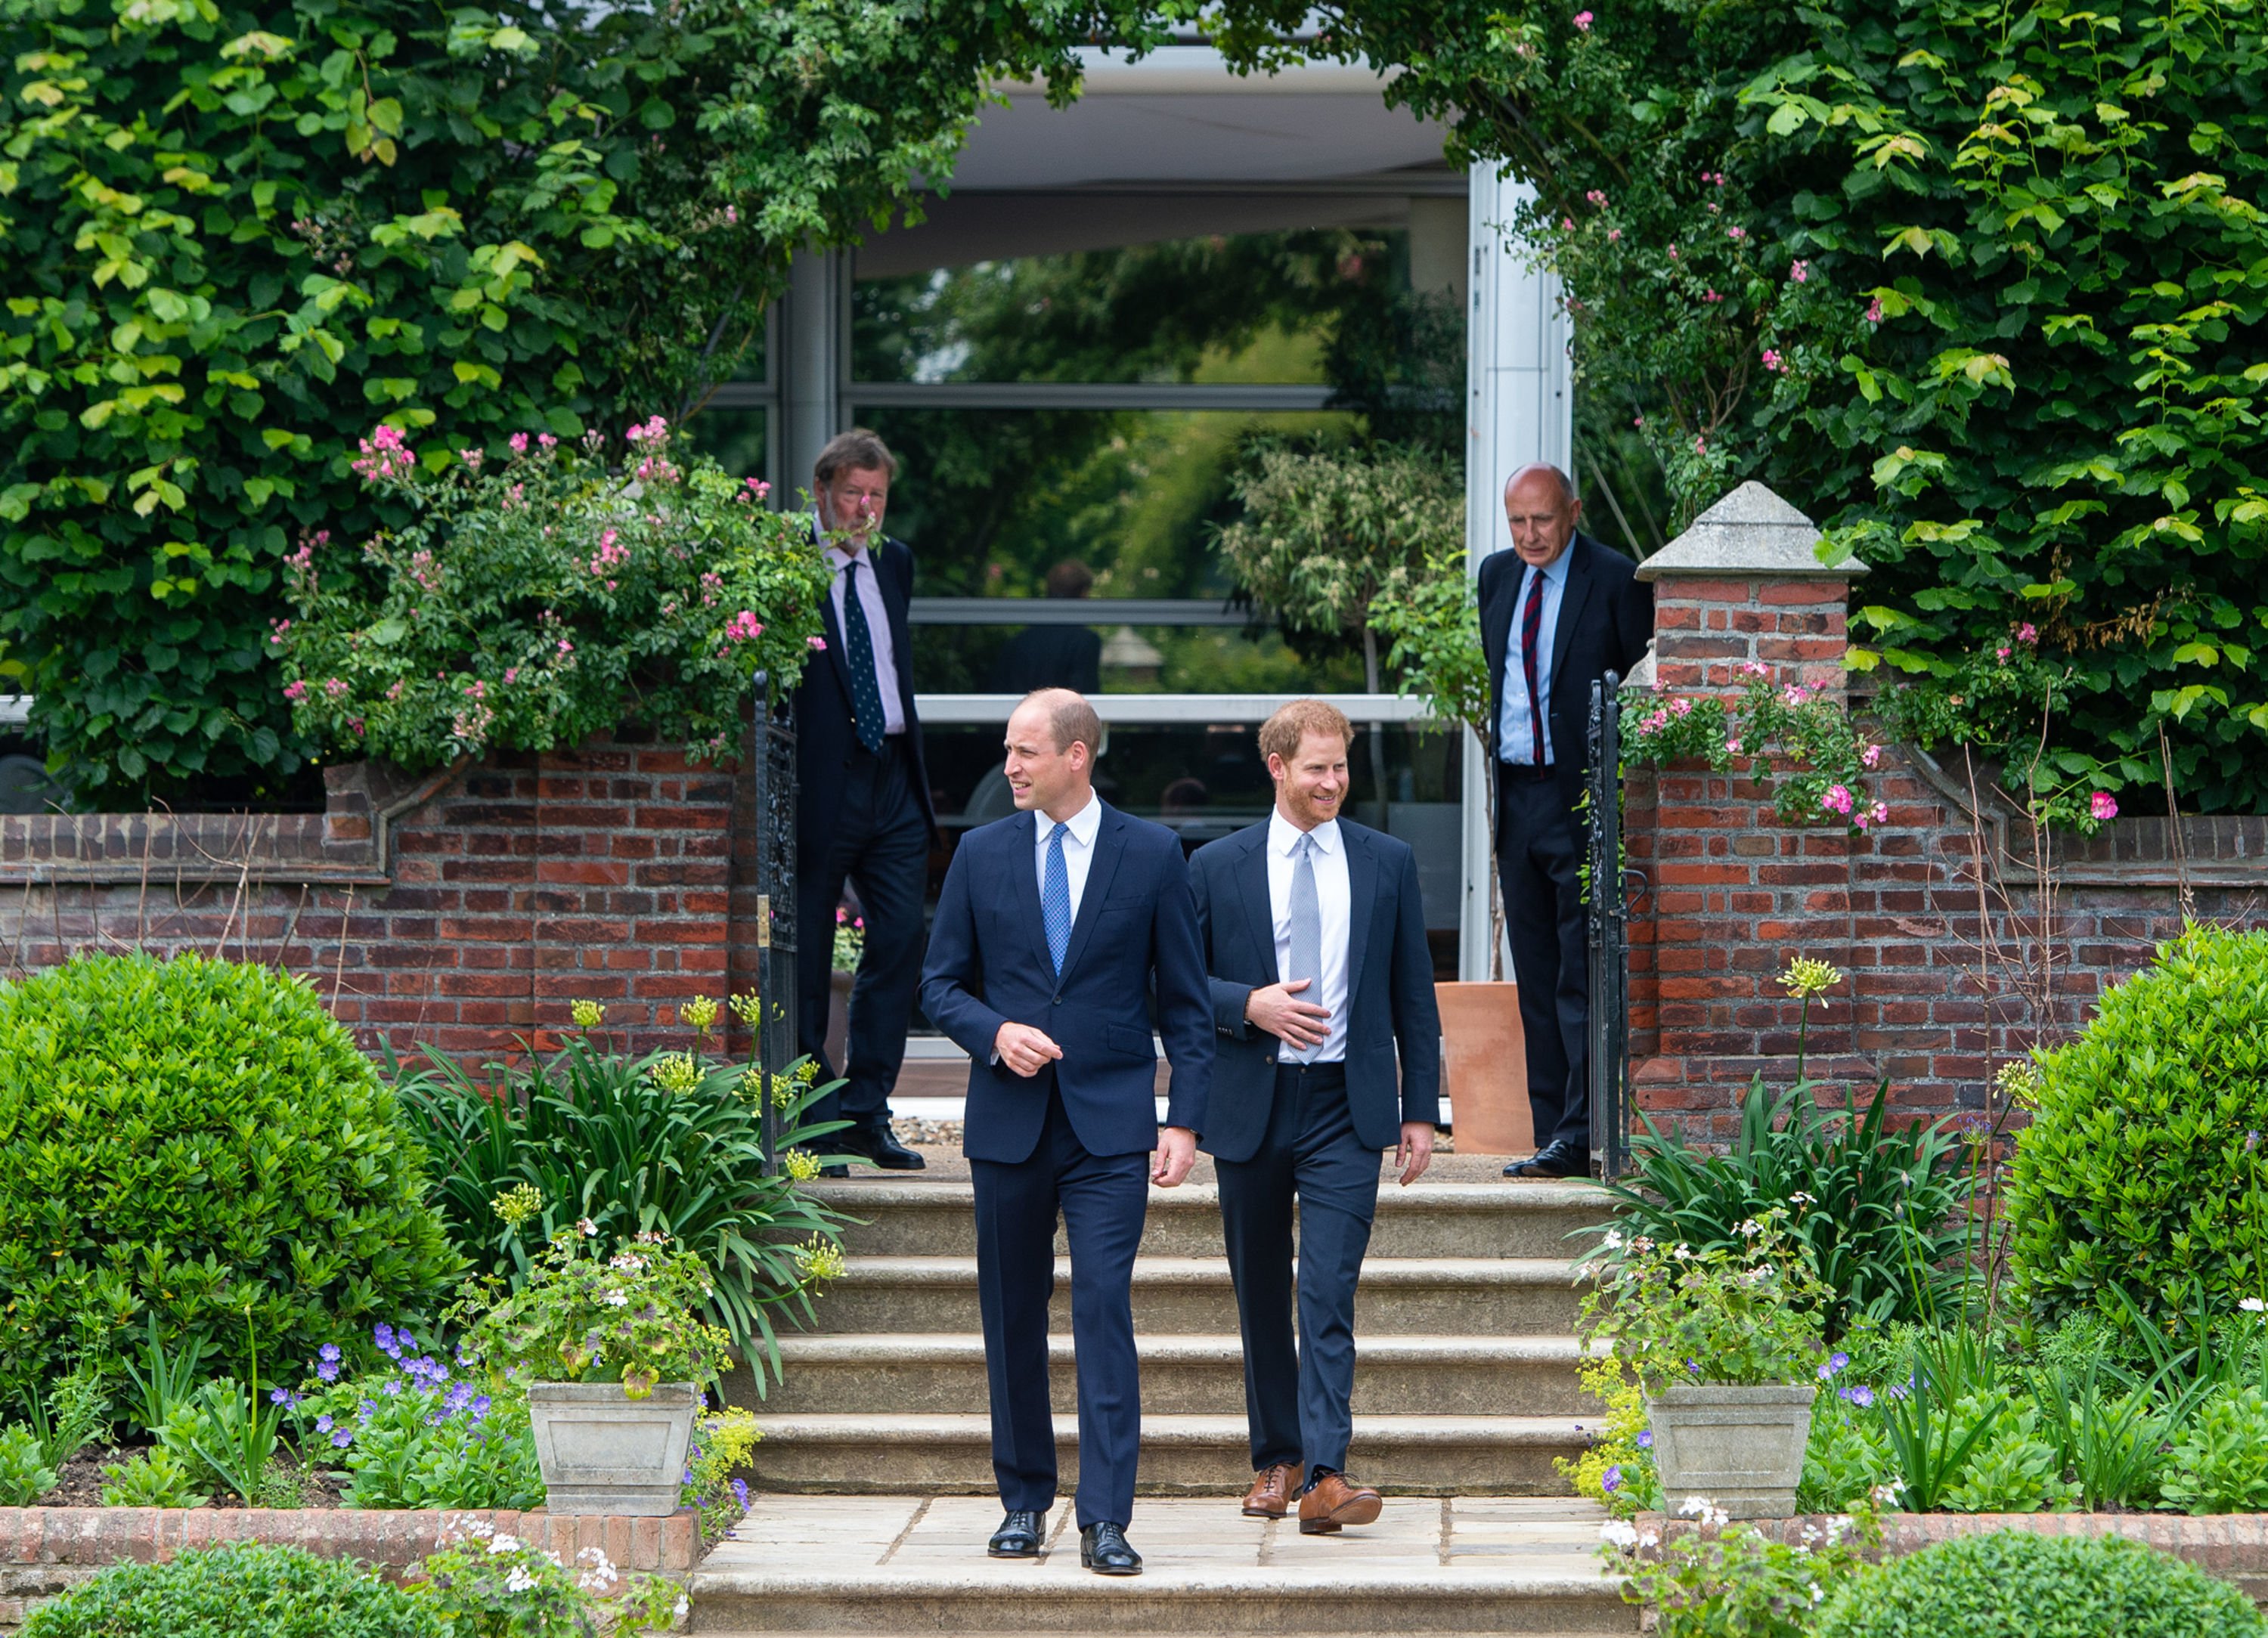 Prince William, Duke of Cambridge and Prince Harry, Duke of Sussex arrive for the unveiling of a statue they commissioned of their mother Diana, Princess of Wales, in the Sunken Garden at Kensington Palace, on what would have been her 60th birthday on July 1, 2021 in London, England. | Source: Getty Images